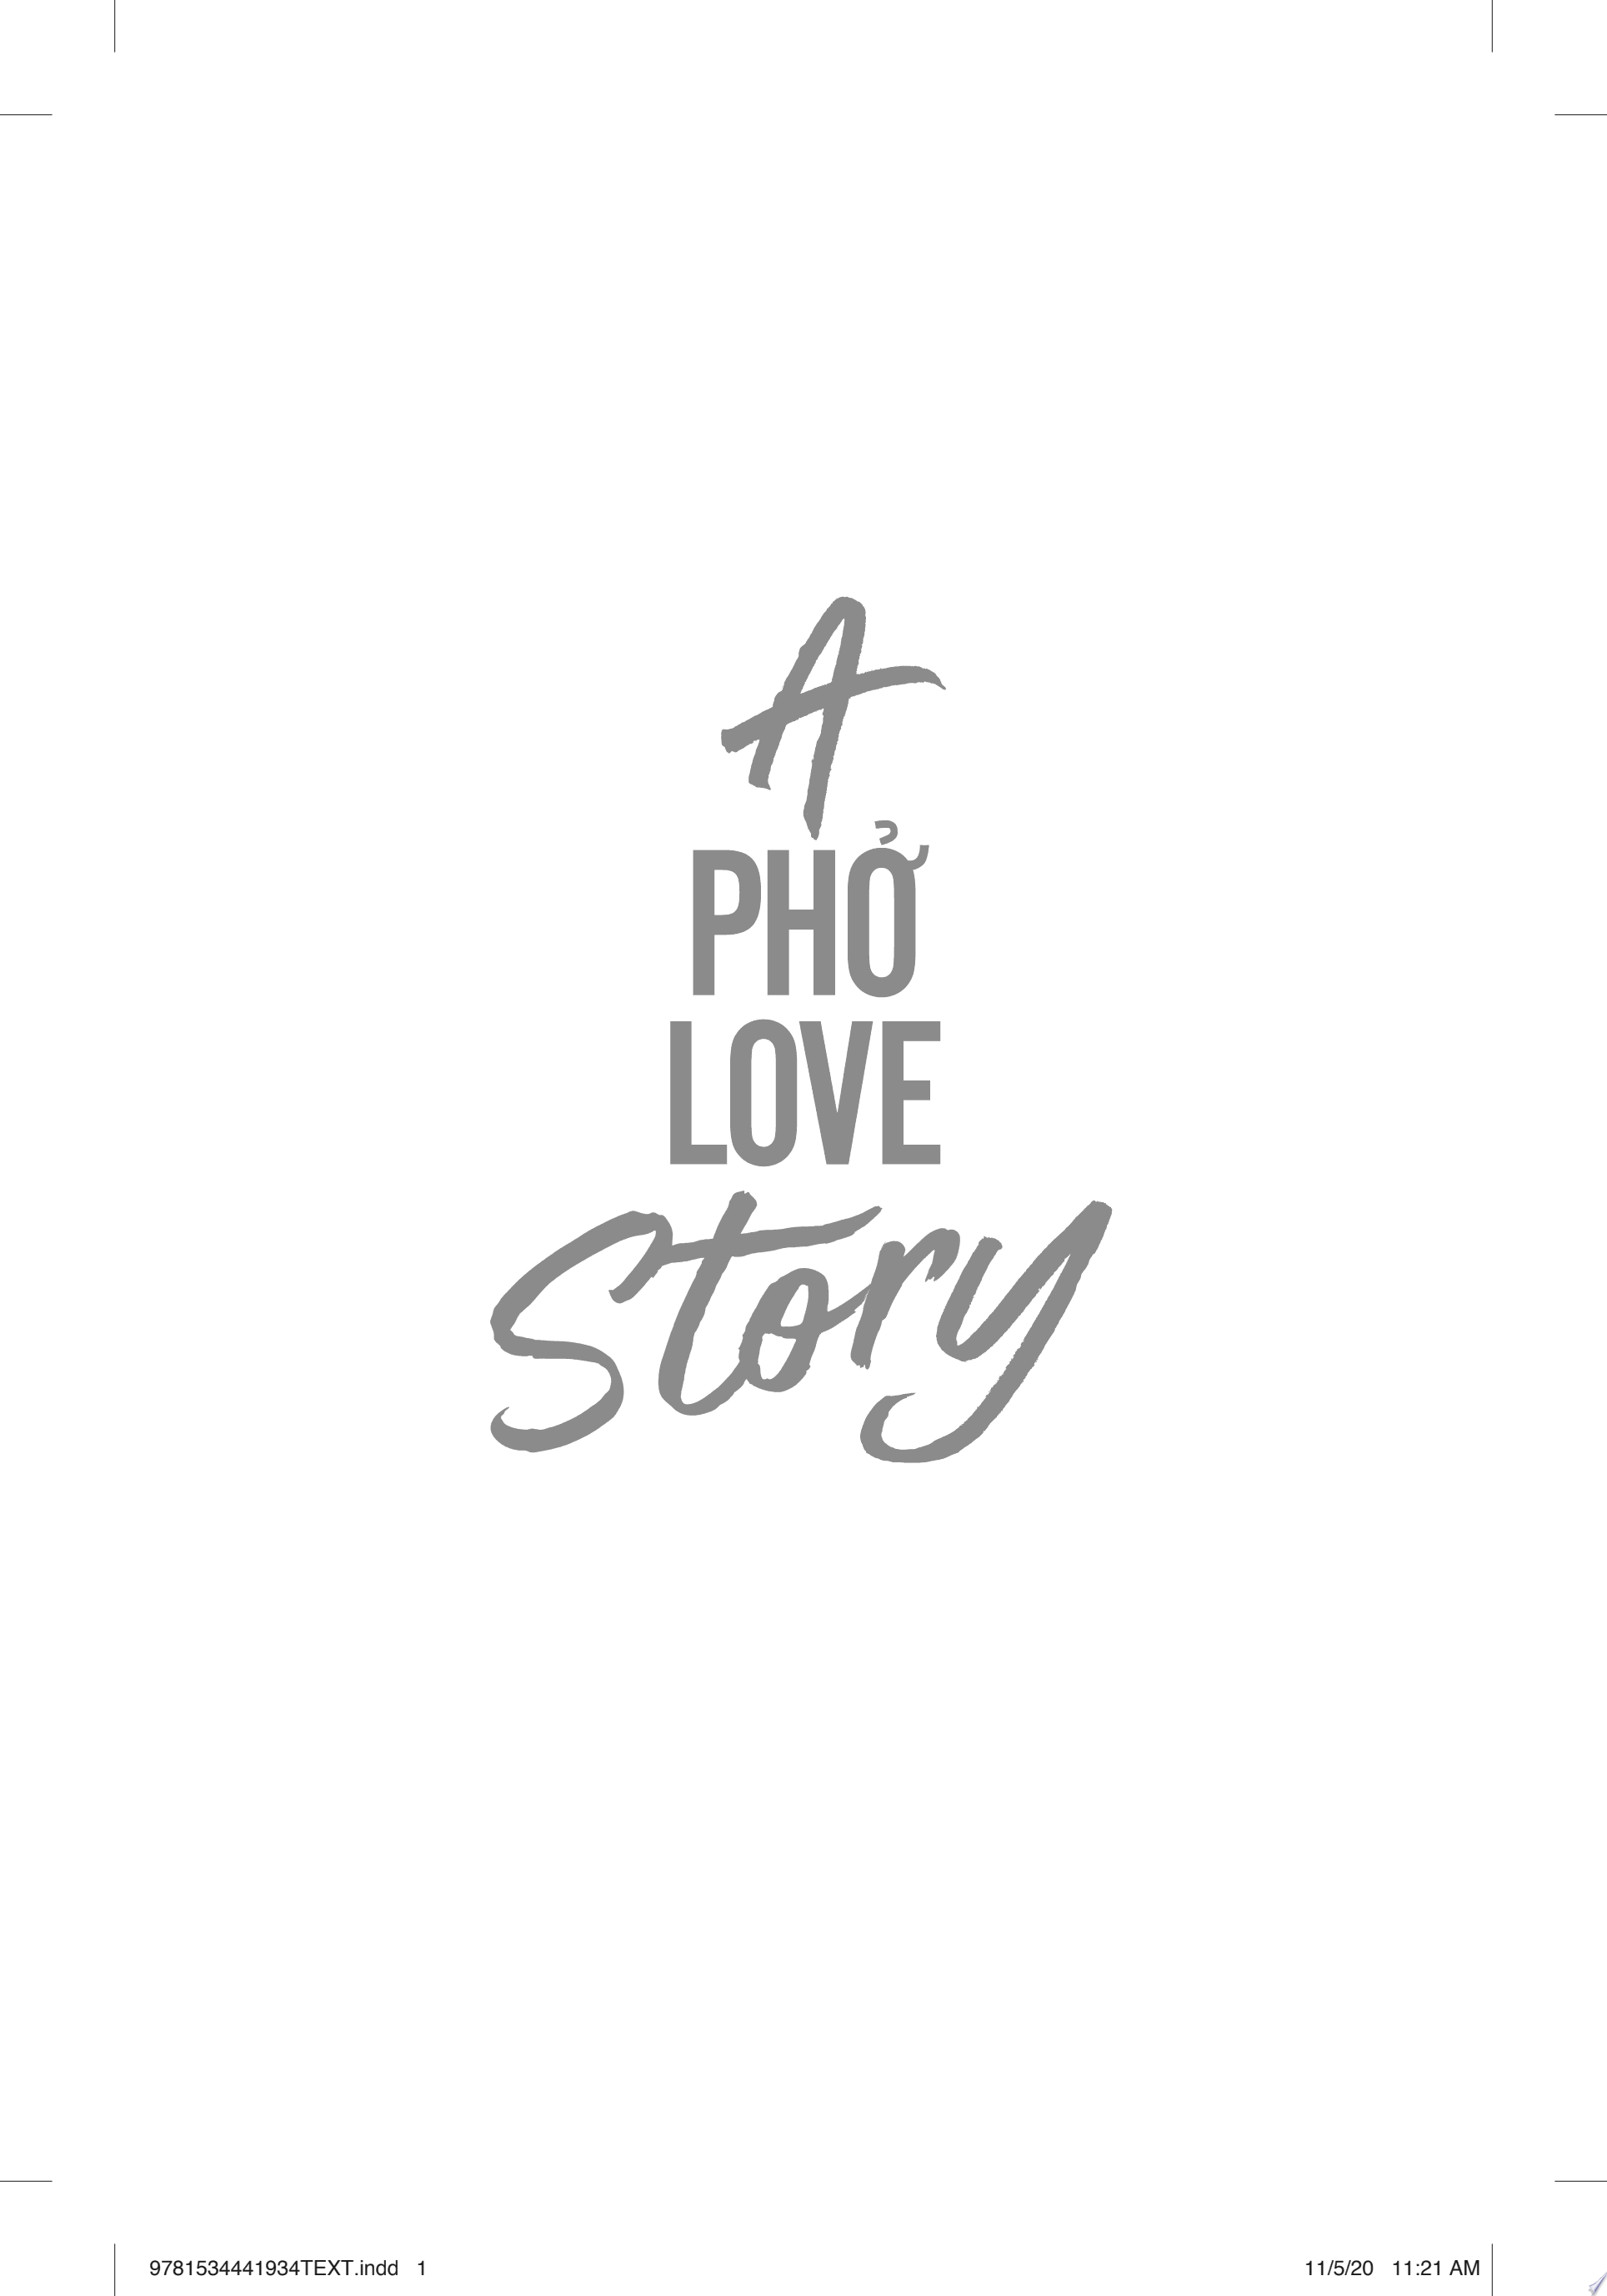 Image for "A Pho Love Story"